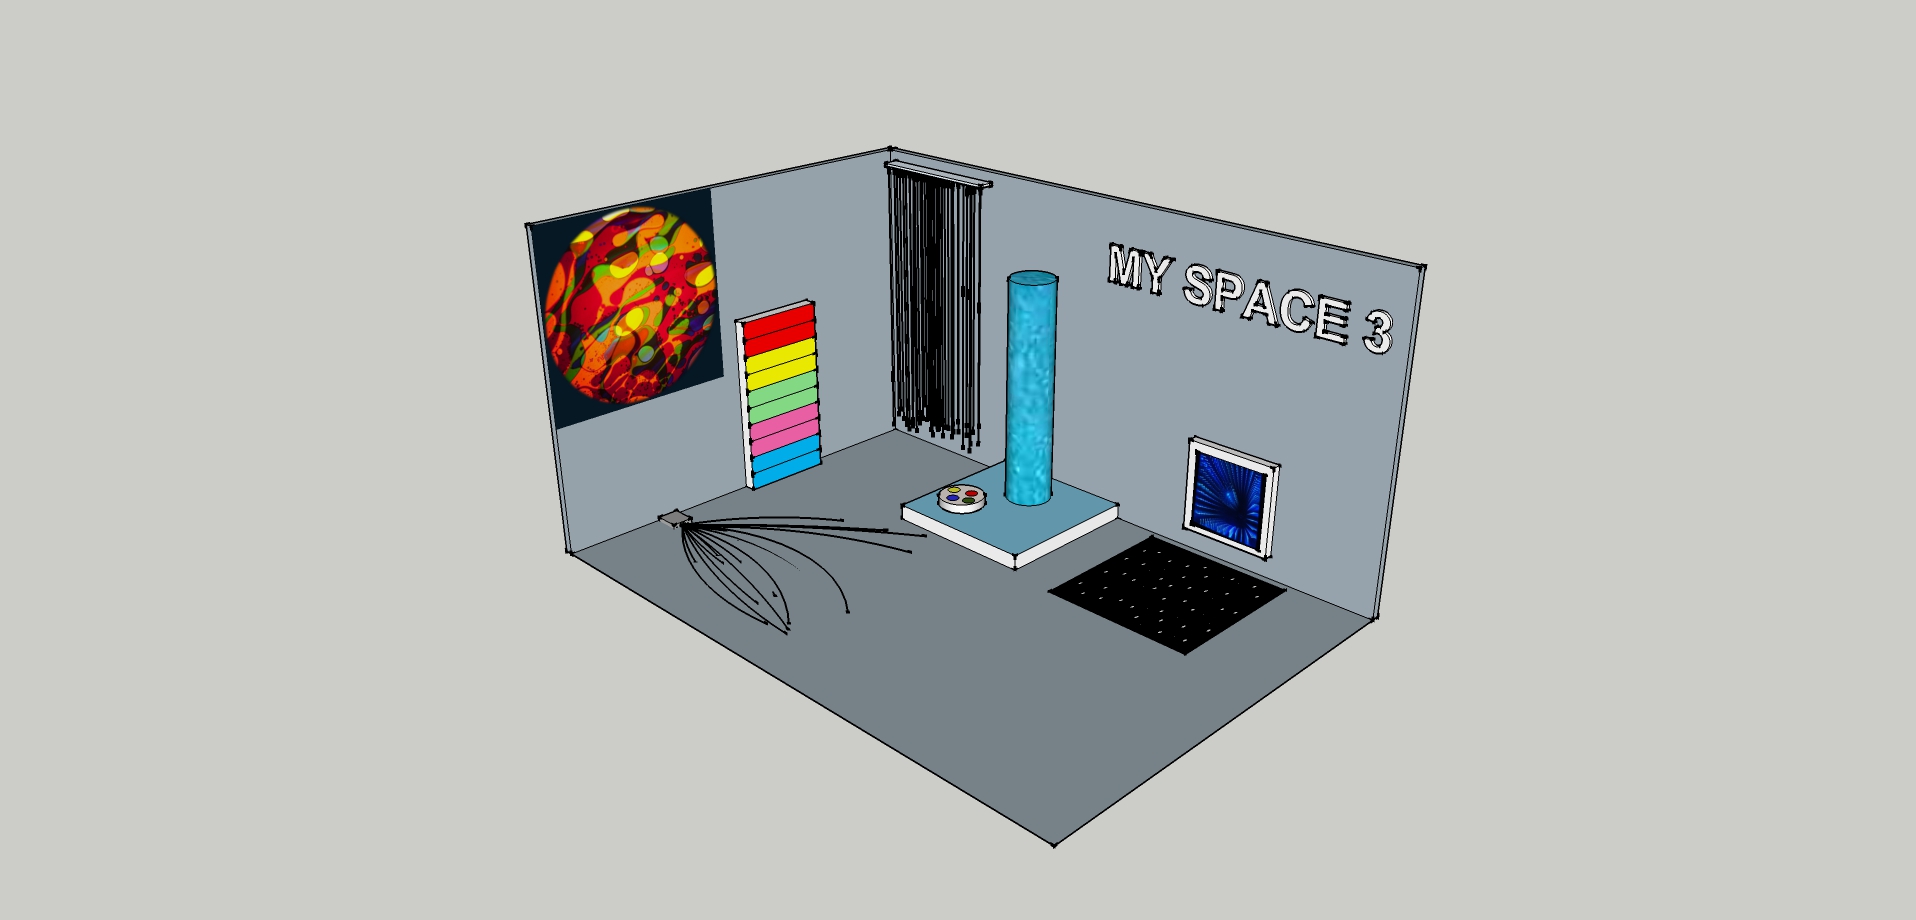 My Space 3